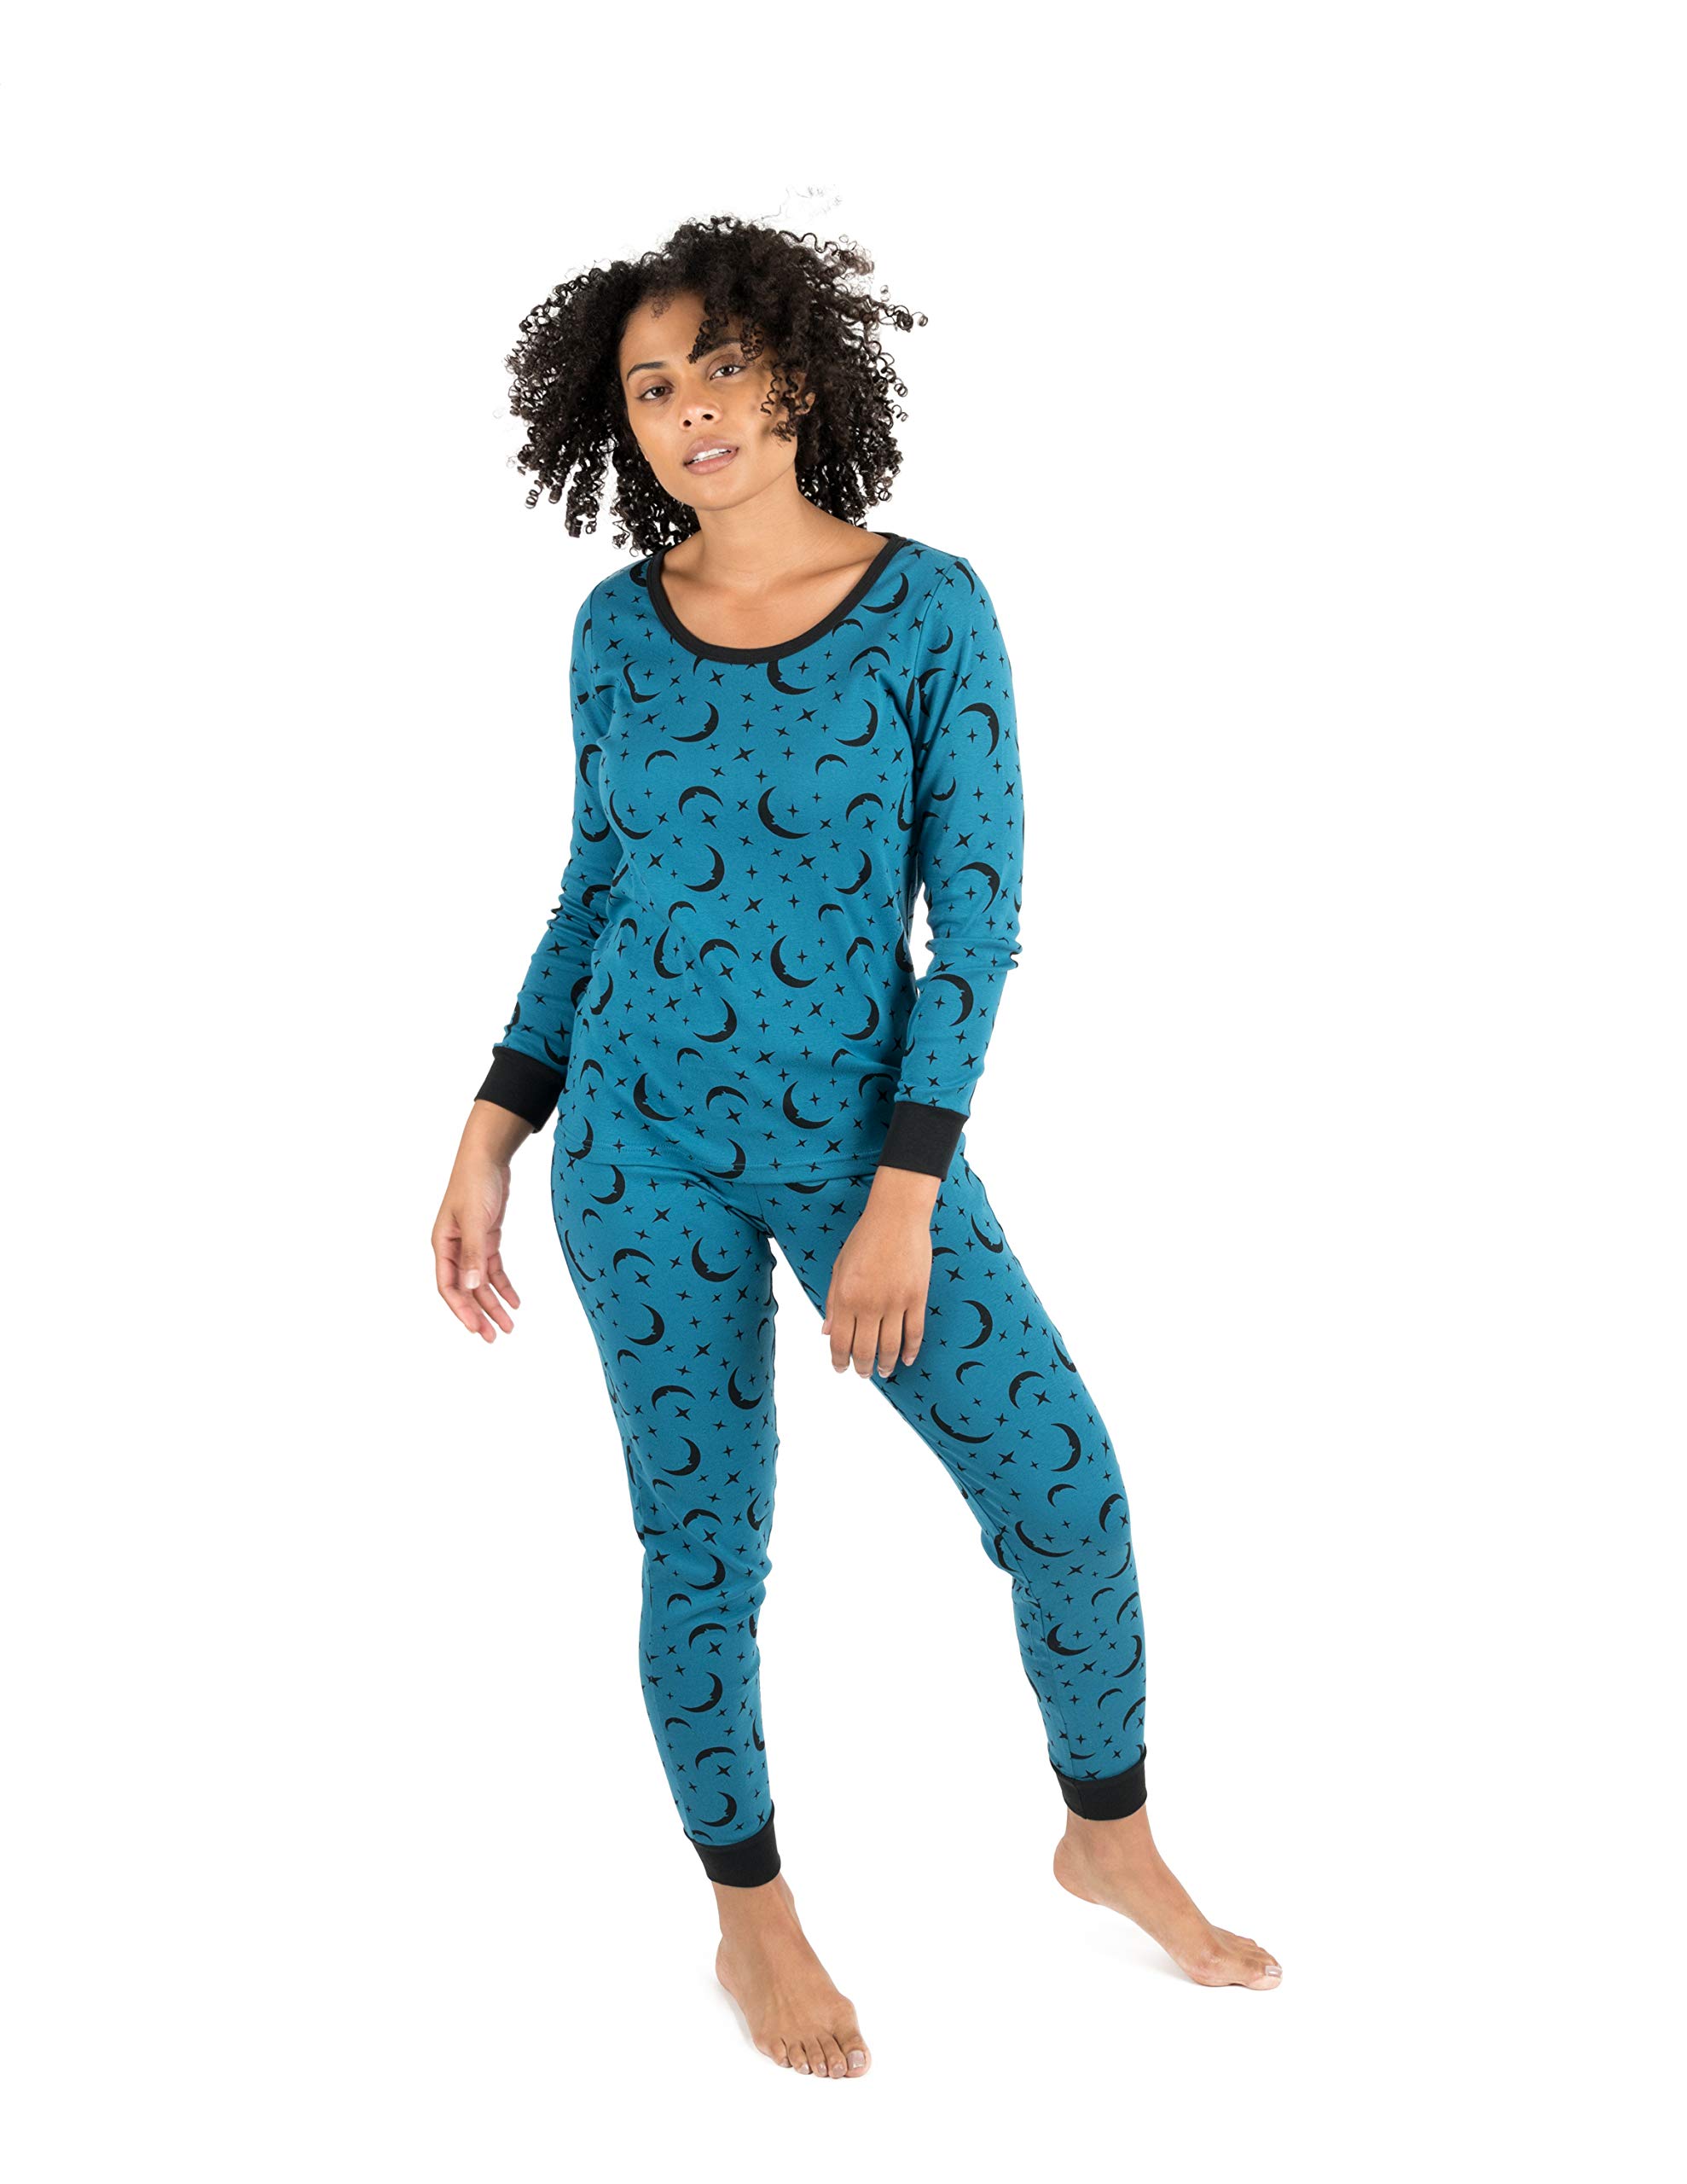 Leveret Women's Pajamas Fitted Printed Owl 2 Piece Pjs Set 100% Cotton ...